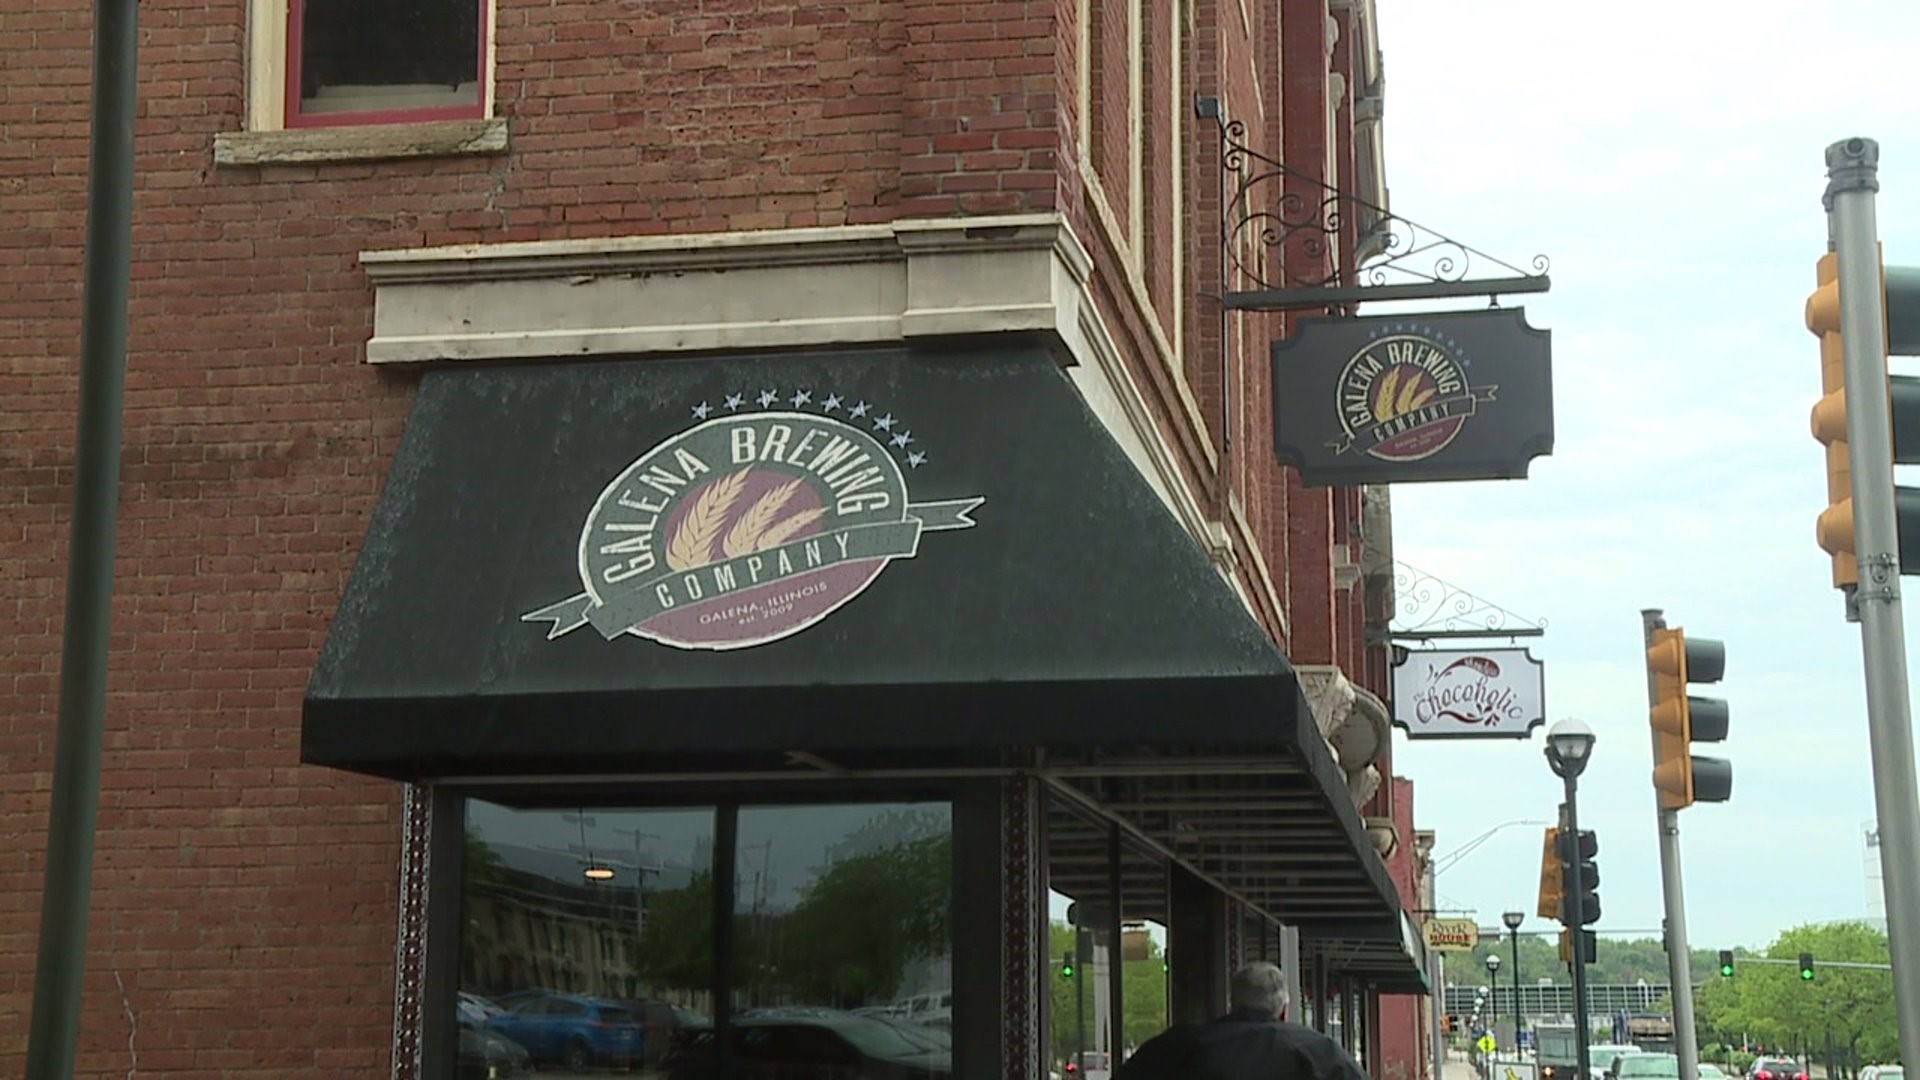 Moline Brewery Owner Reacts to Tax Hike Proposal